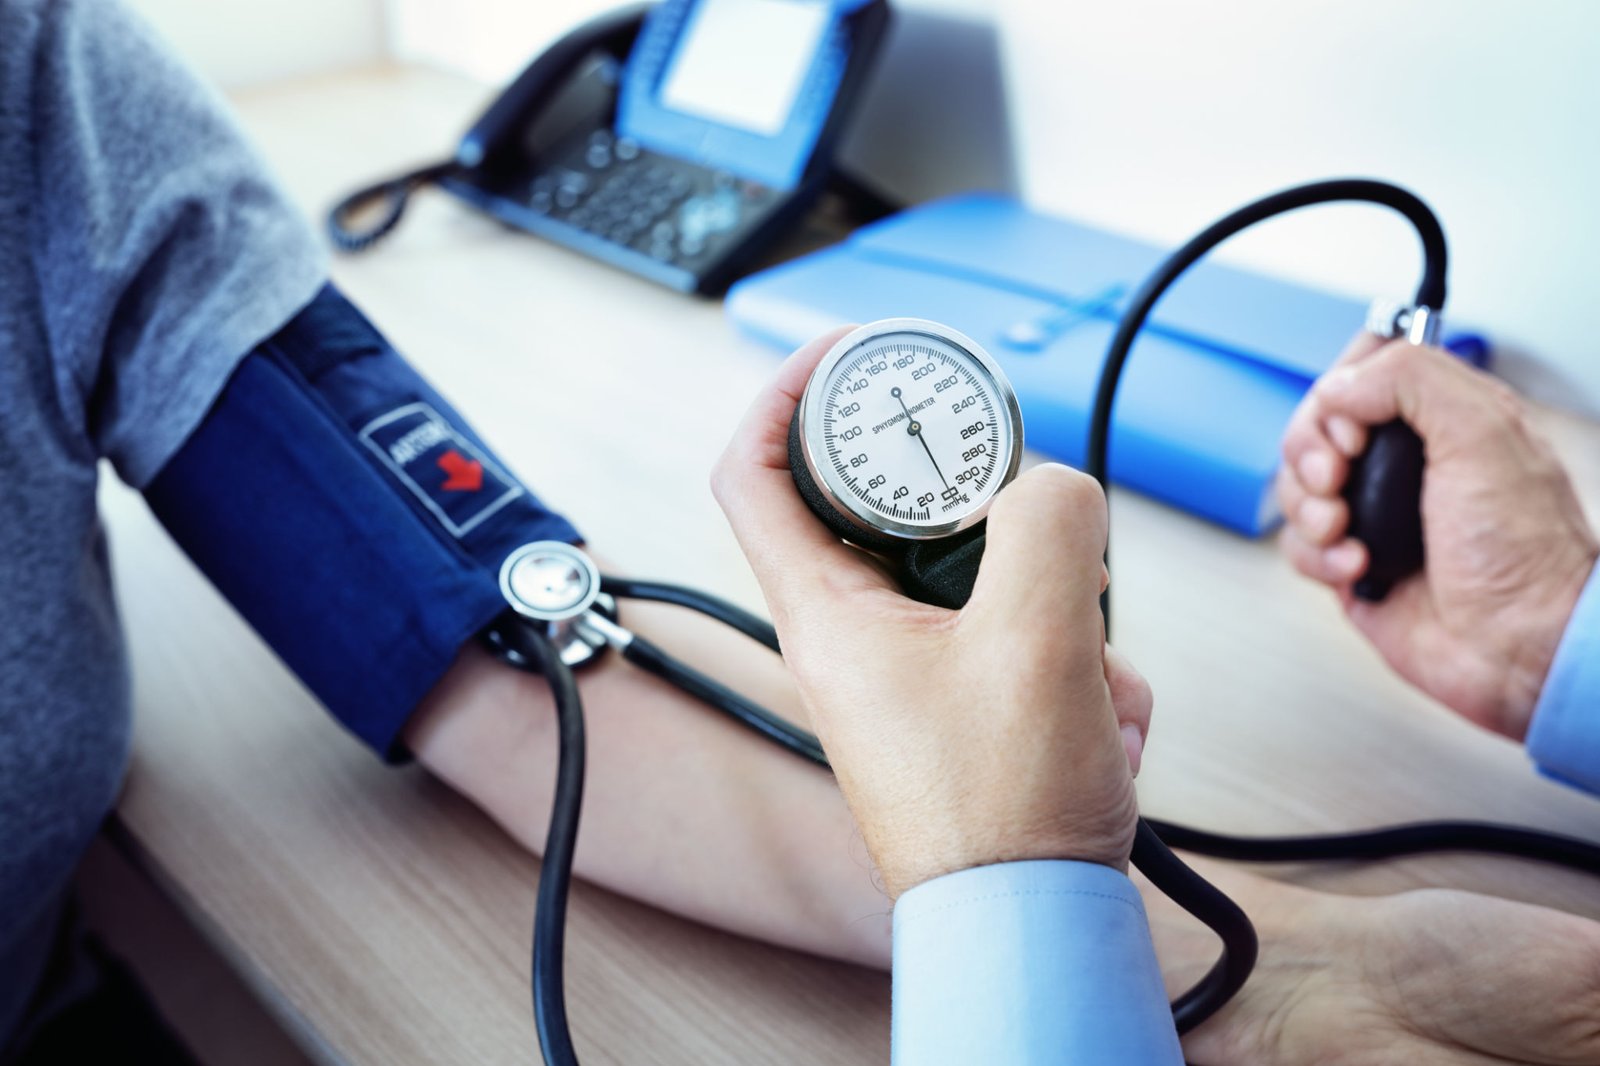 7 Remedies You Need To Take Now To Control Hypertension At Home